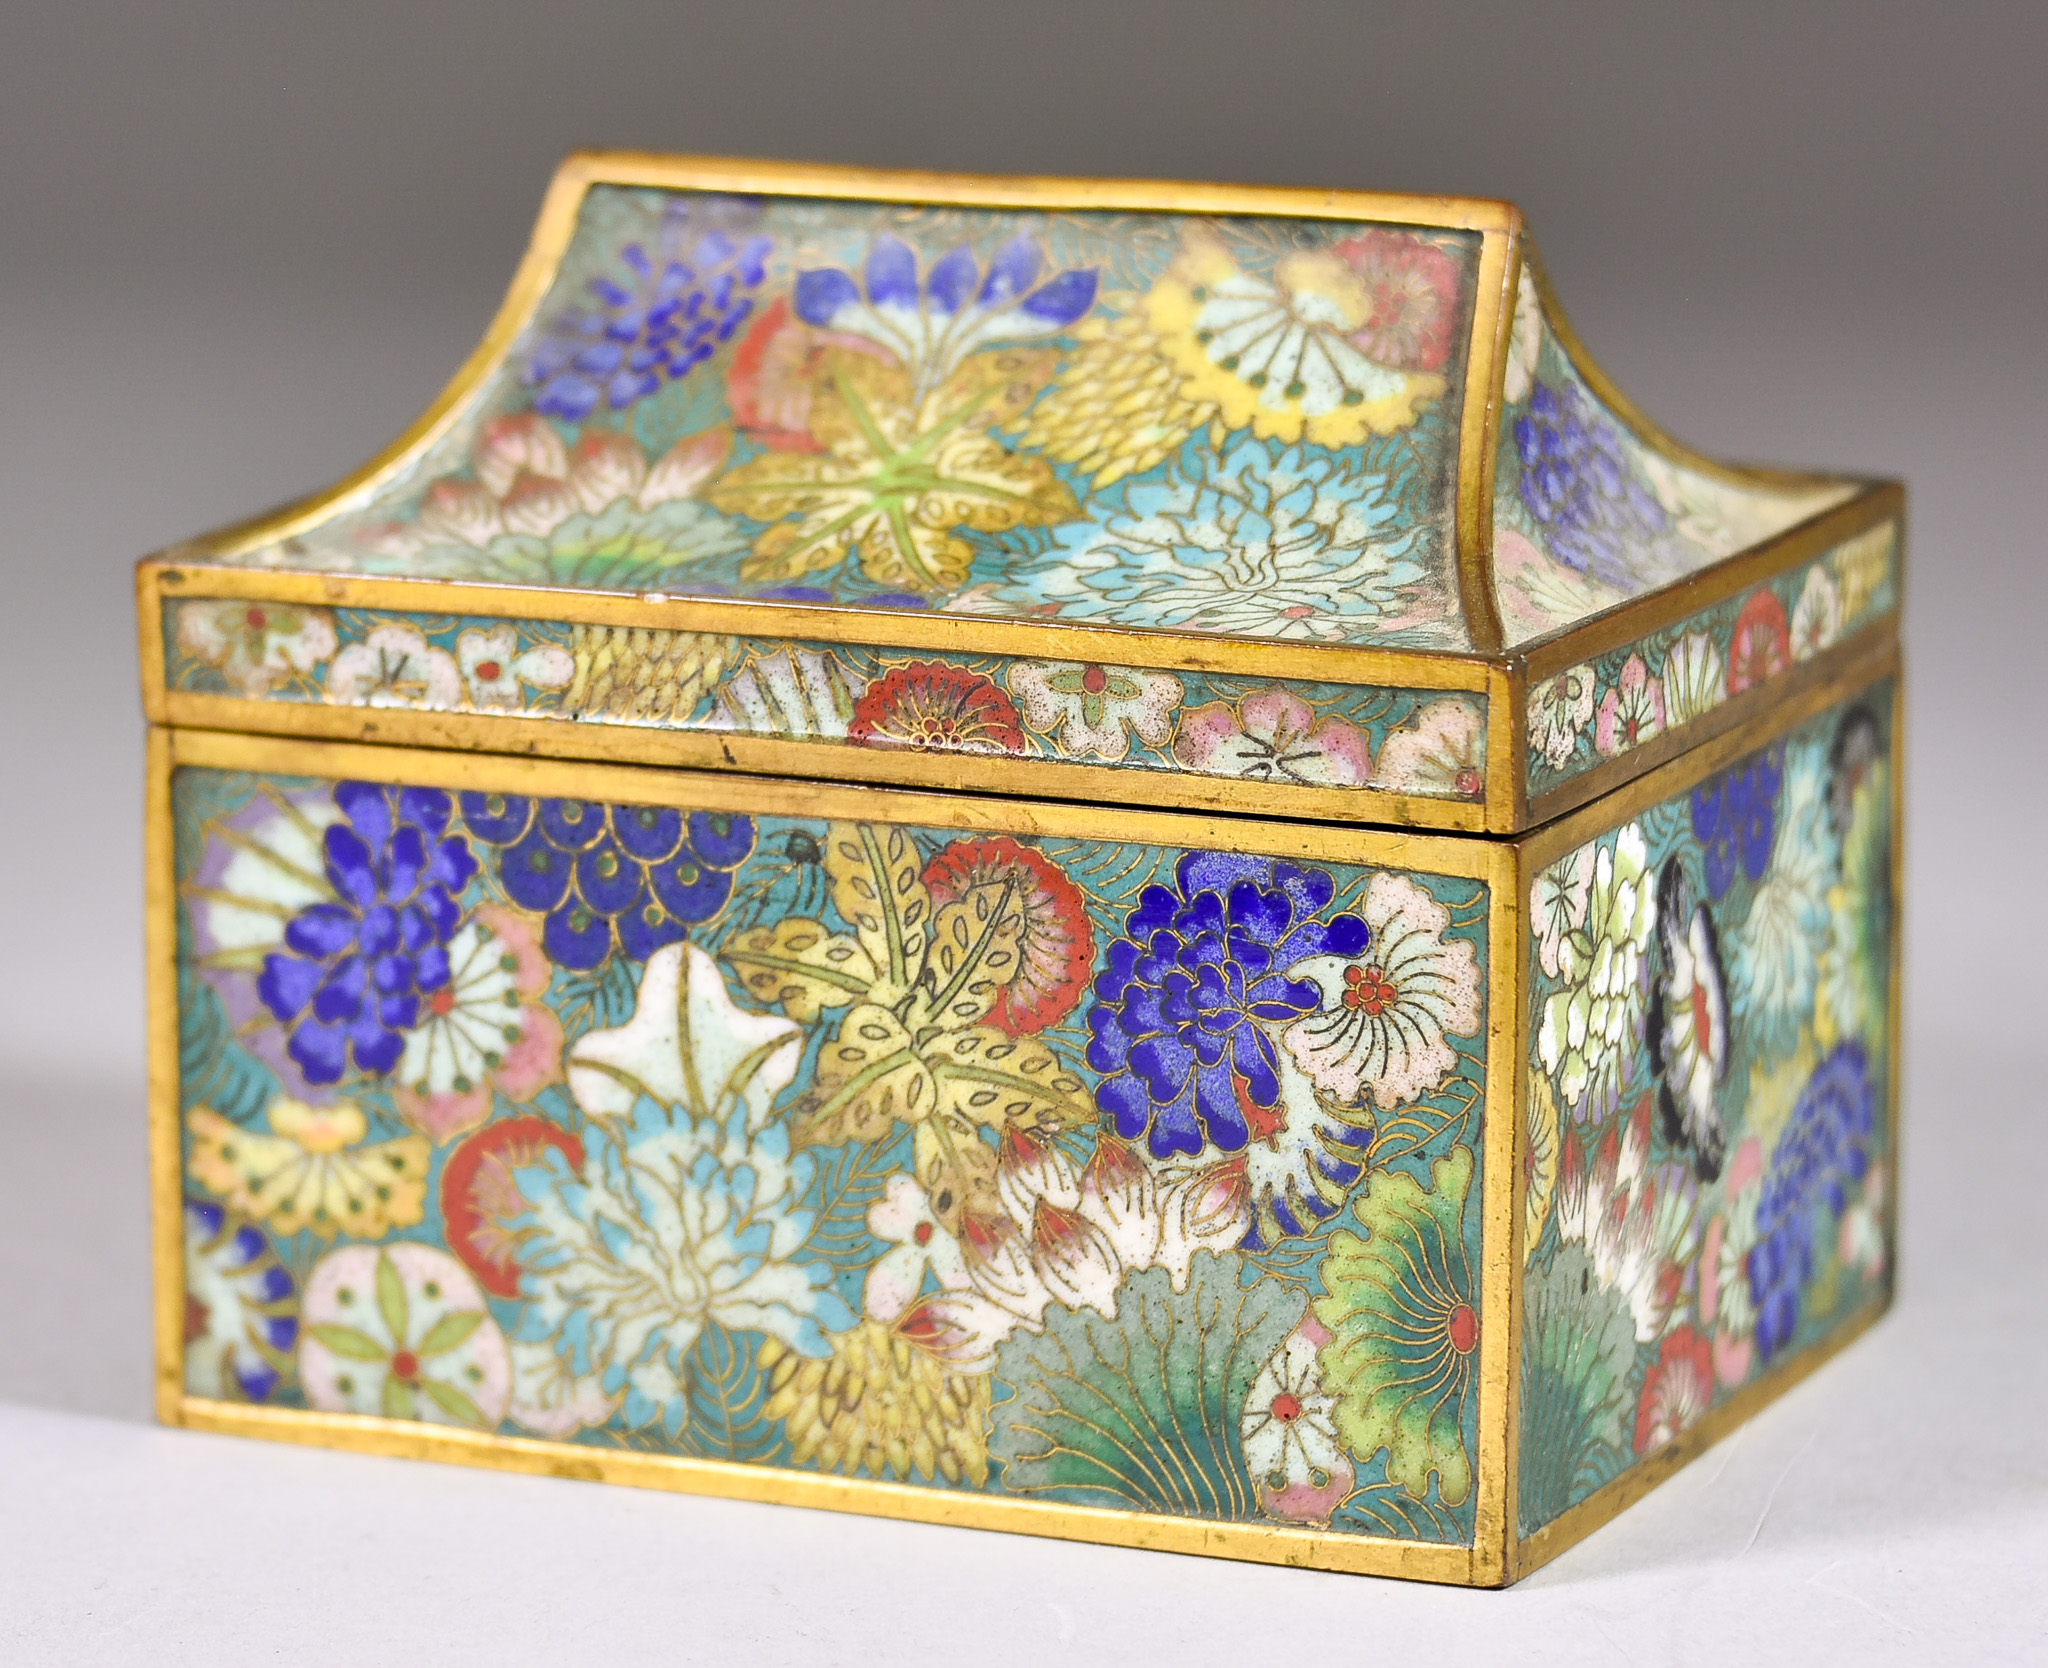 A Chinese Cloisonne Enamel Inkwell and Cover, Late 19th/Early 20th Century, the 'casket' form